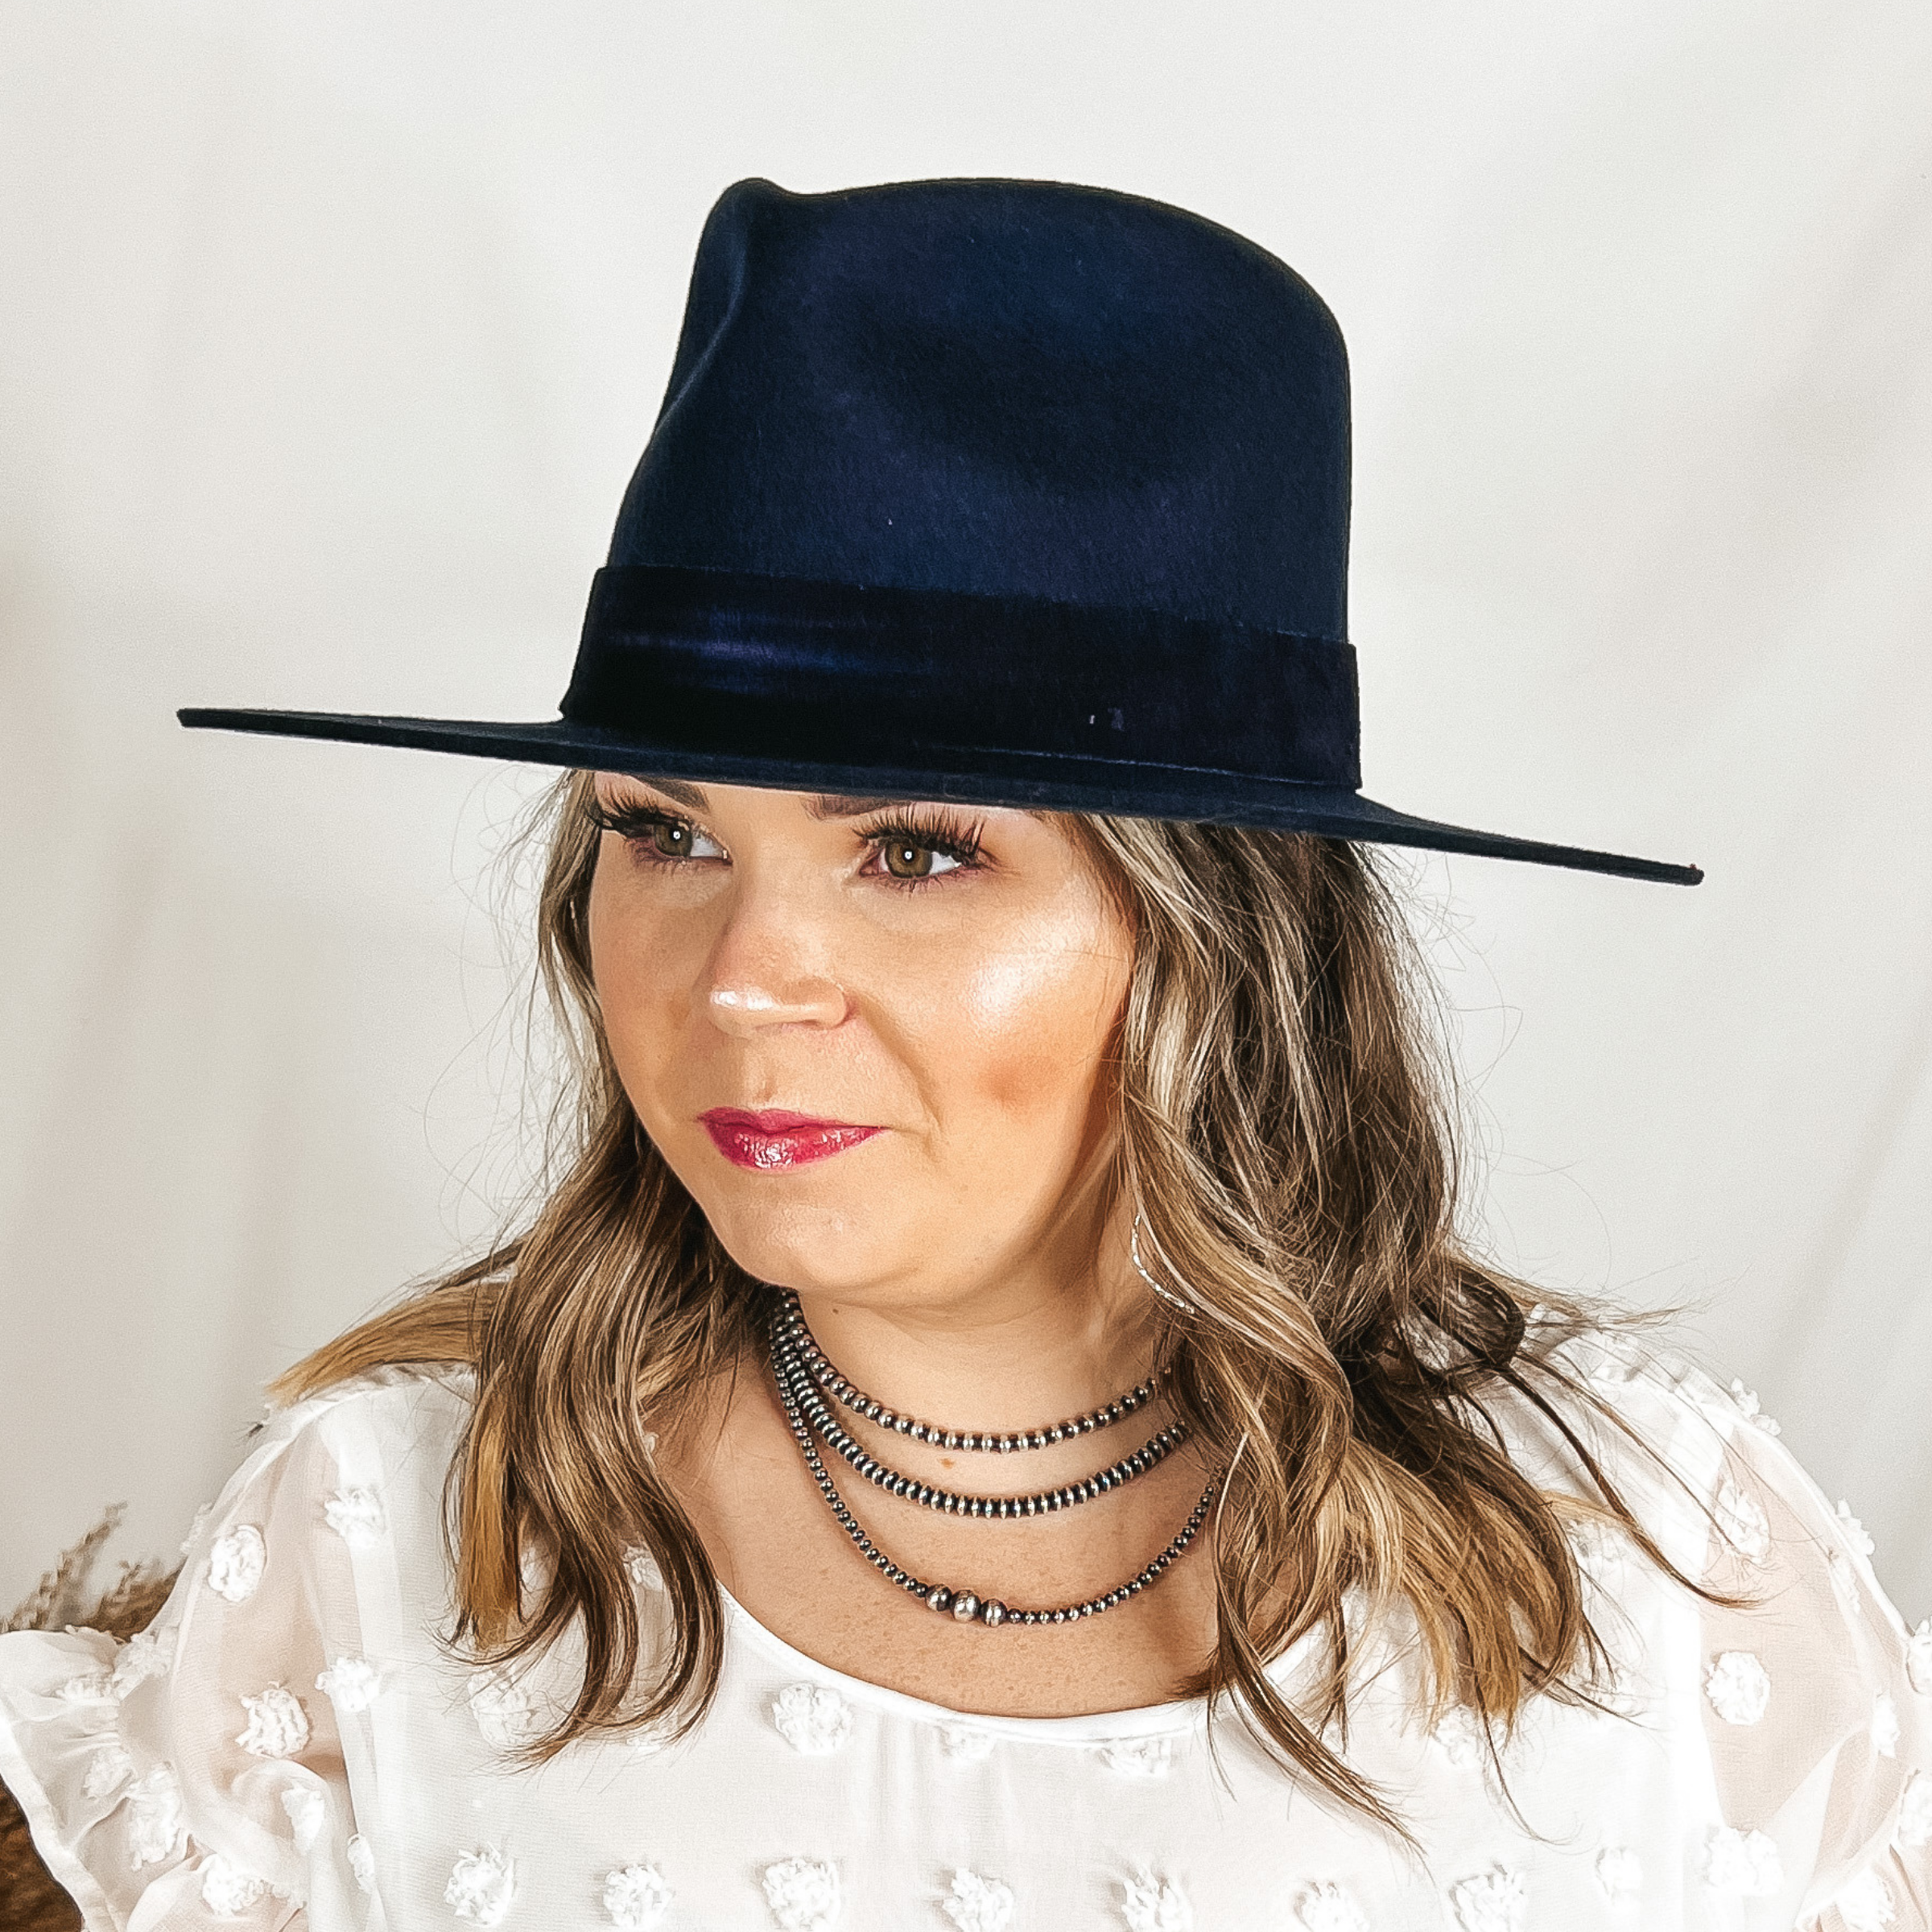 Model is wearing a navy blue rancher hat with a velvet hat band.